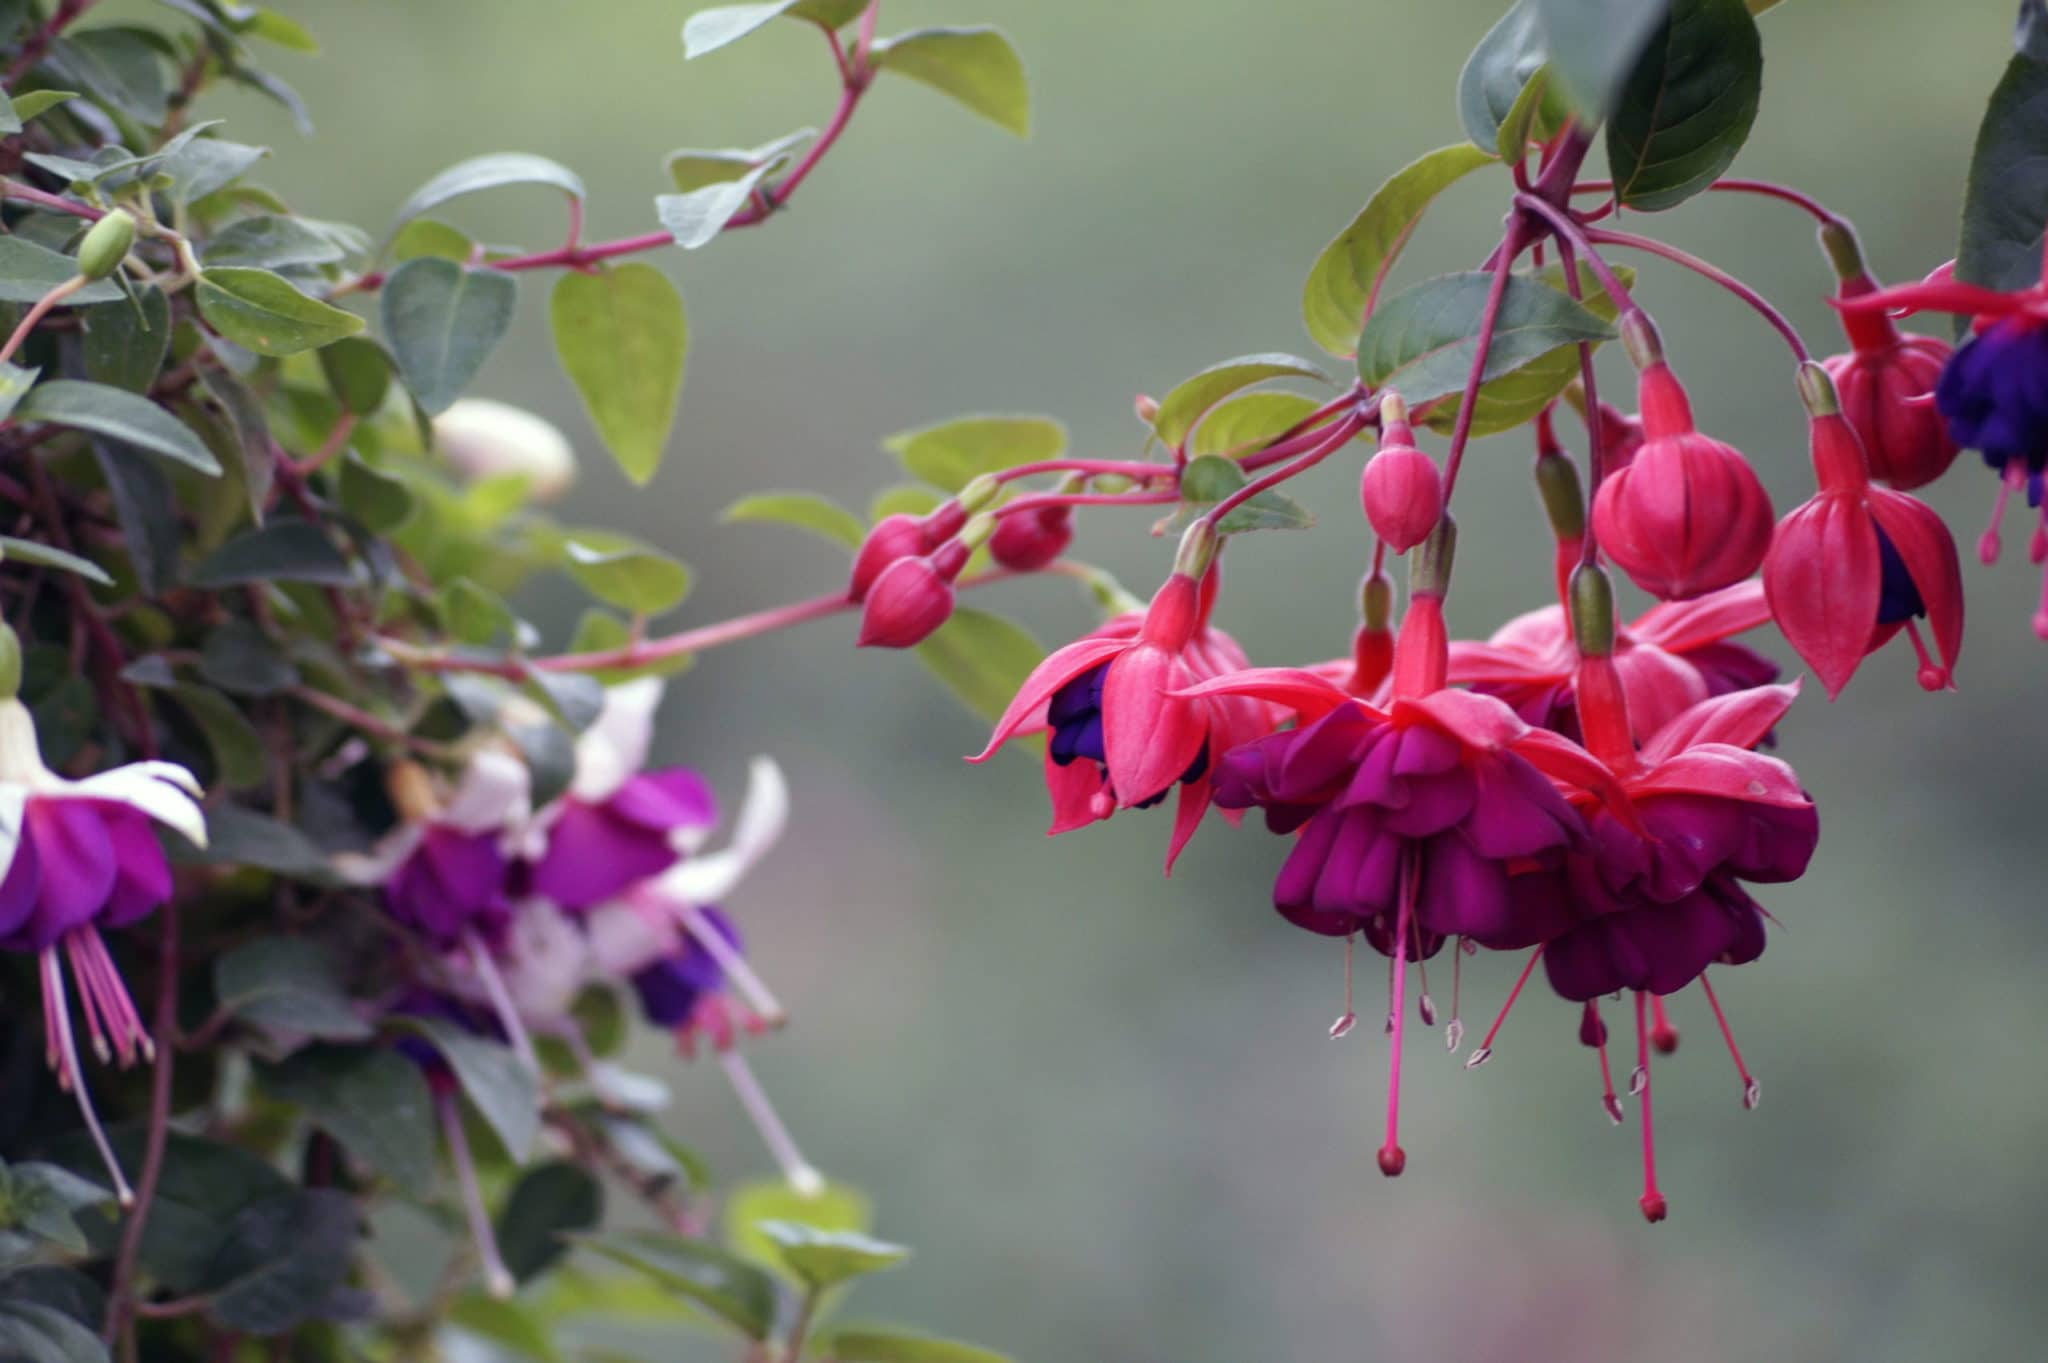 How To Grow The Fuchsias In A Greenhouse